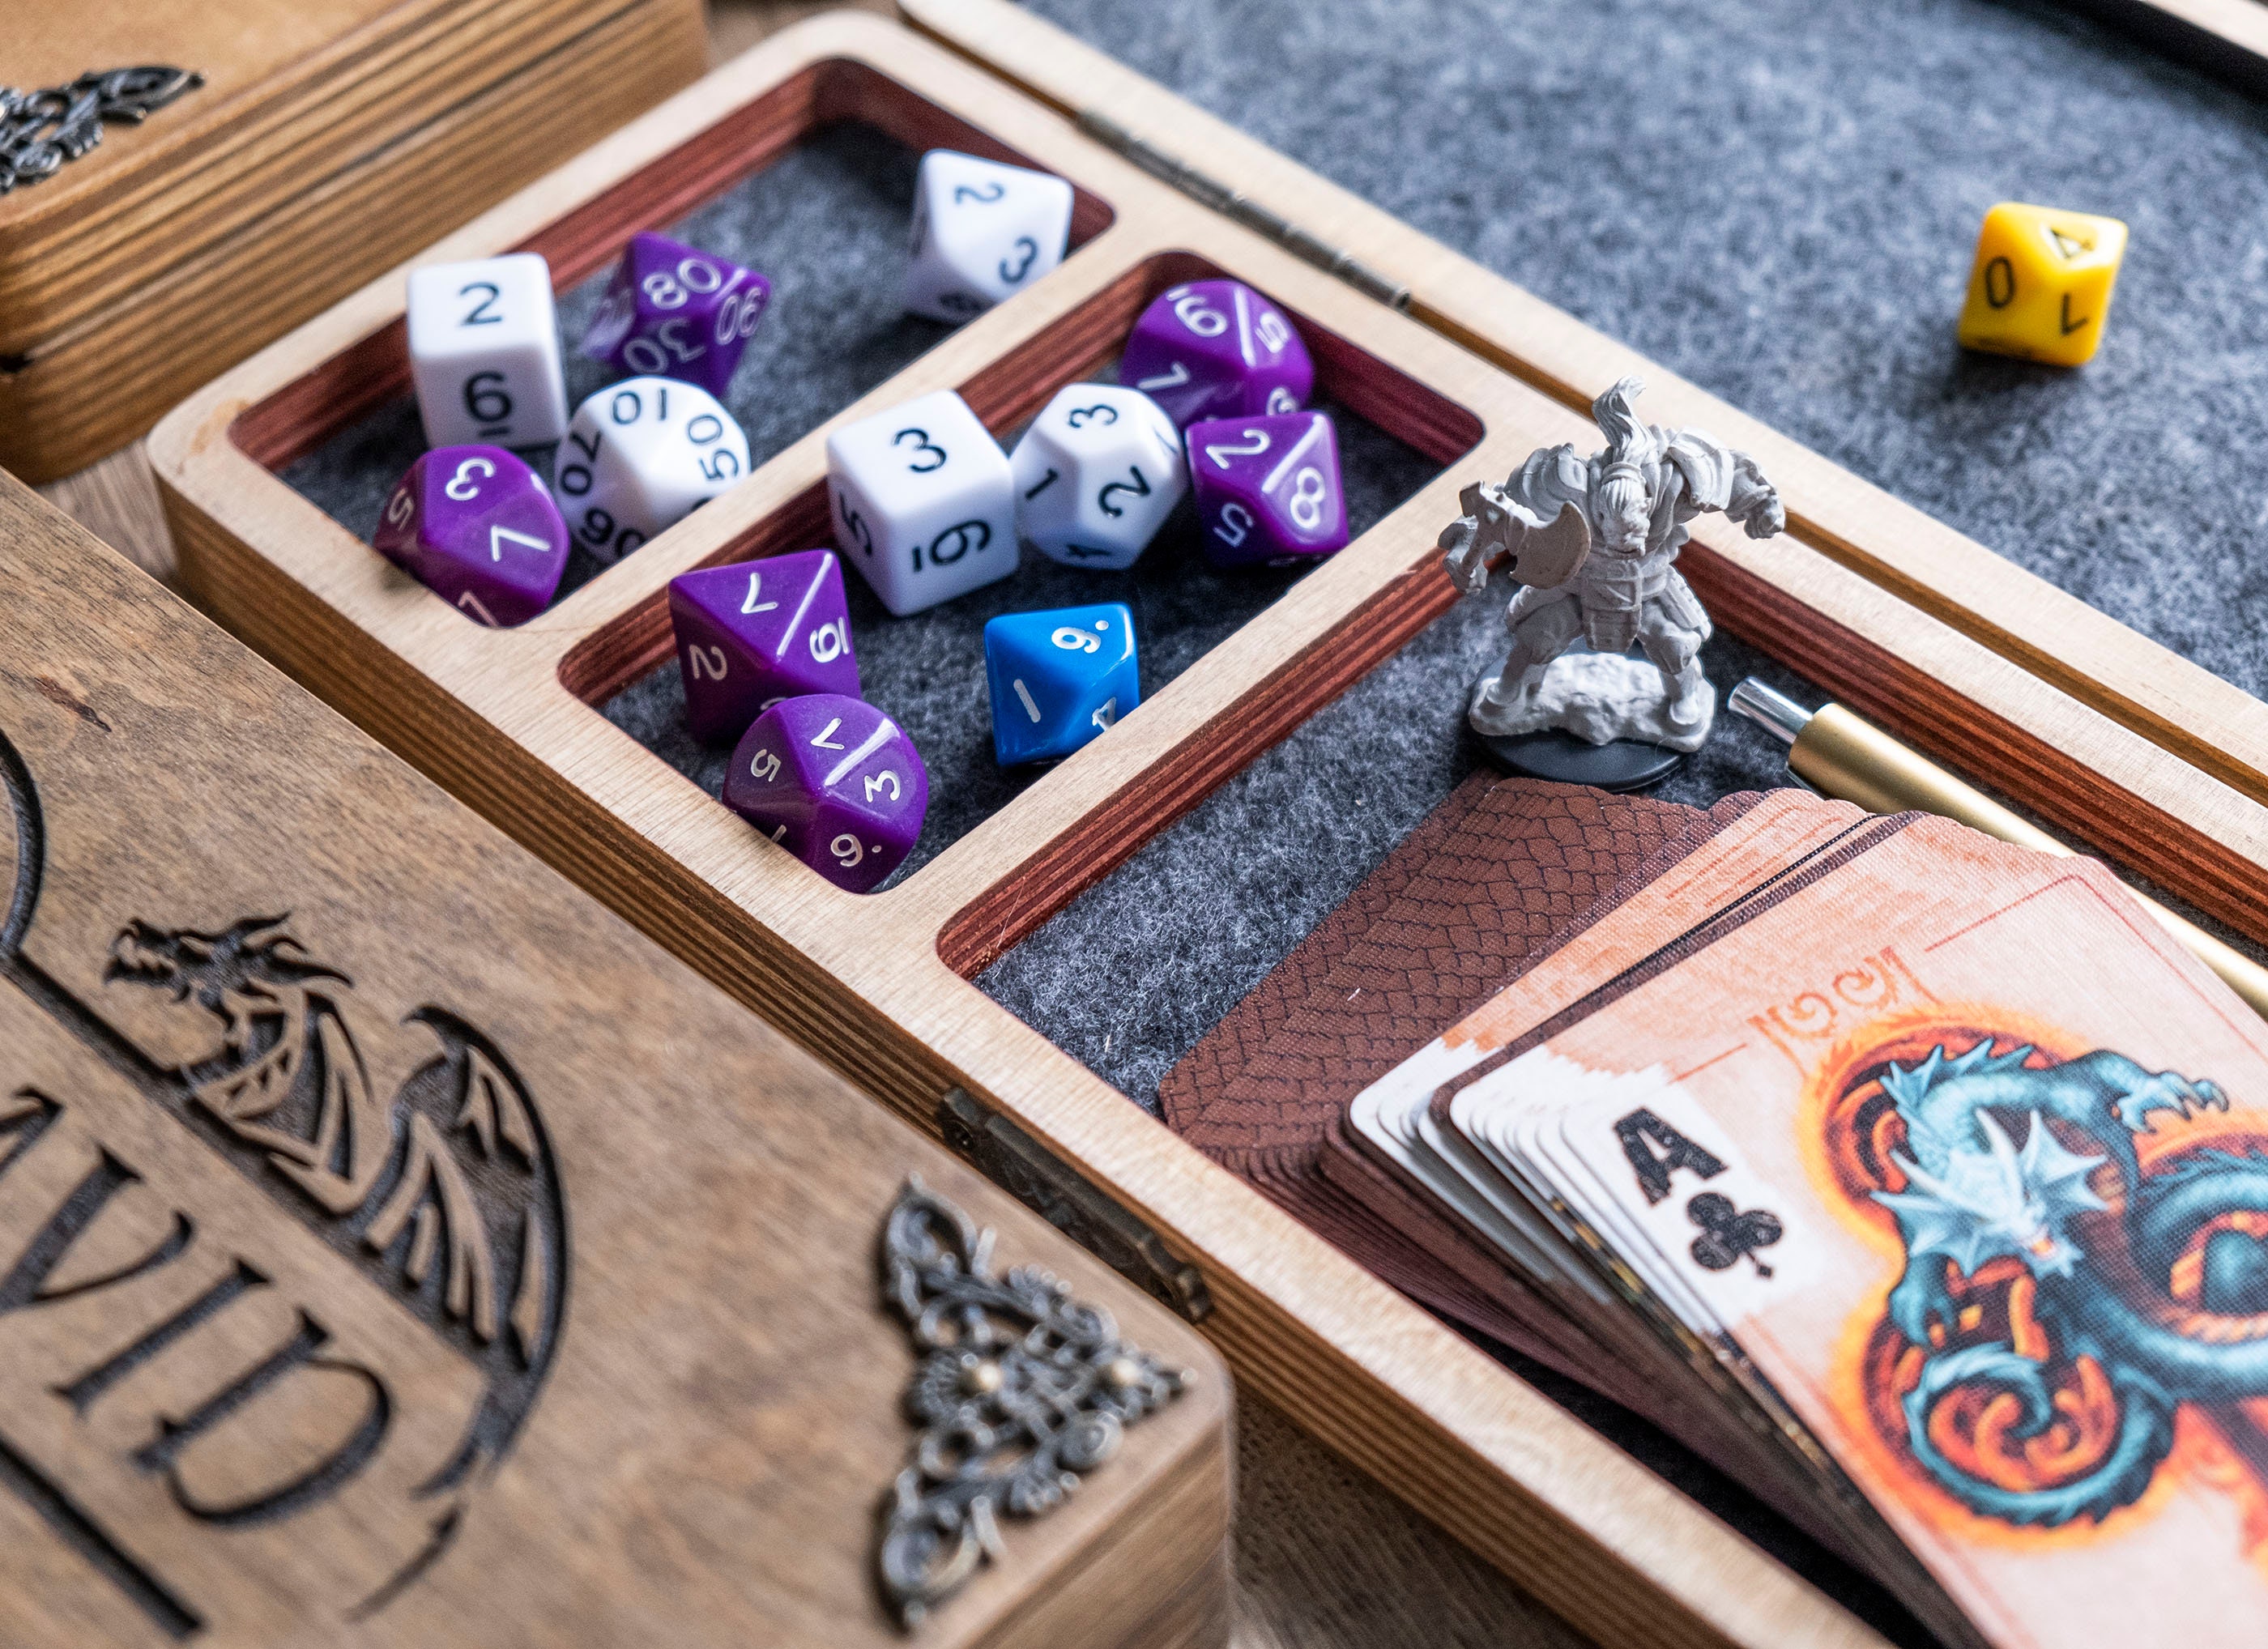 Dice Vault Table Top Role Playing and Gaming Accessories by Eldritch Arts  Wooden Box for Bones Board Games Tabletop Games 